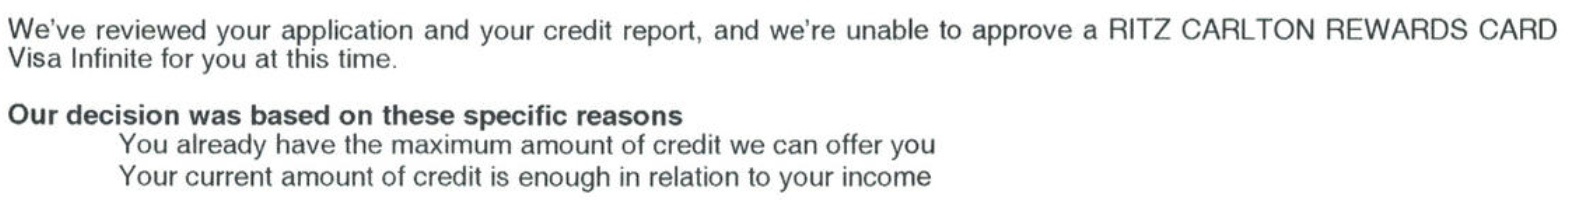 A screenshot of a letter from Chase informing the recipient that Chase could not approve a Ritz Carlton Rewards Card because the applicant had too much credit extended by Chase and sufficient credit in relation to income.